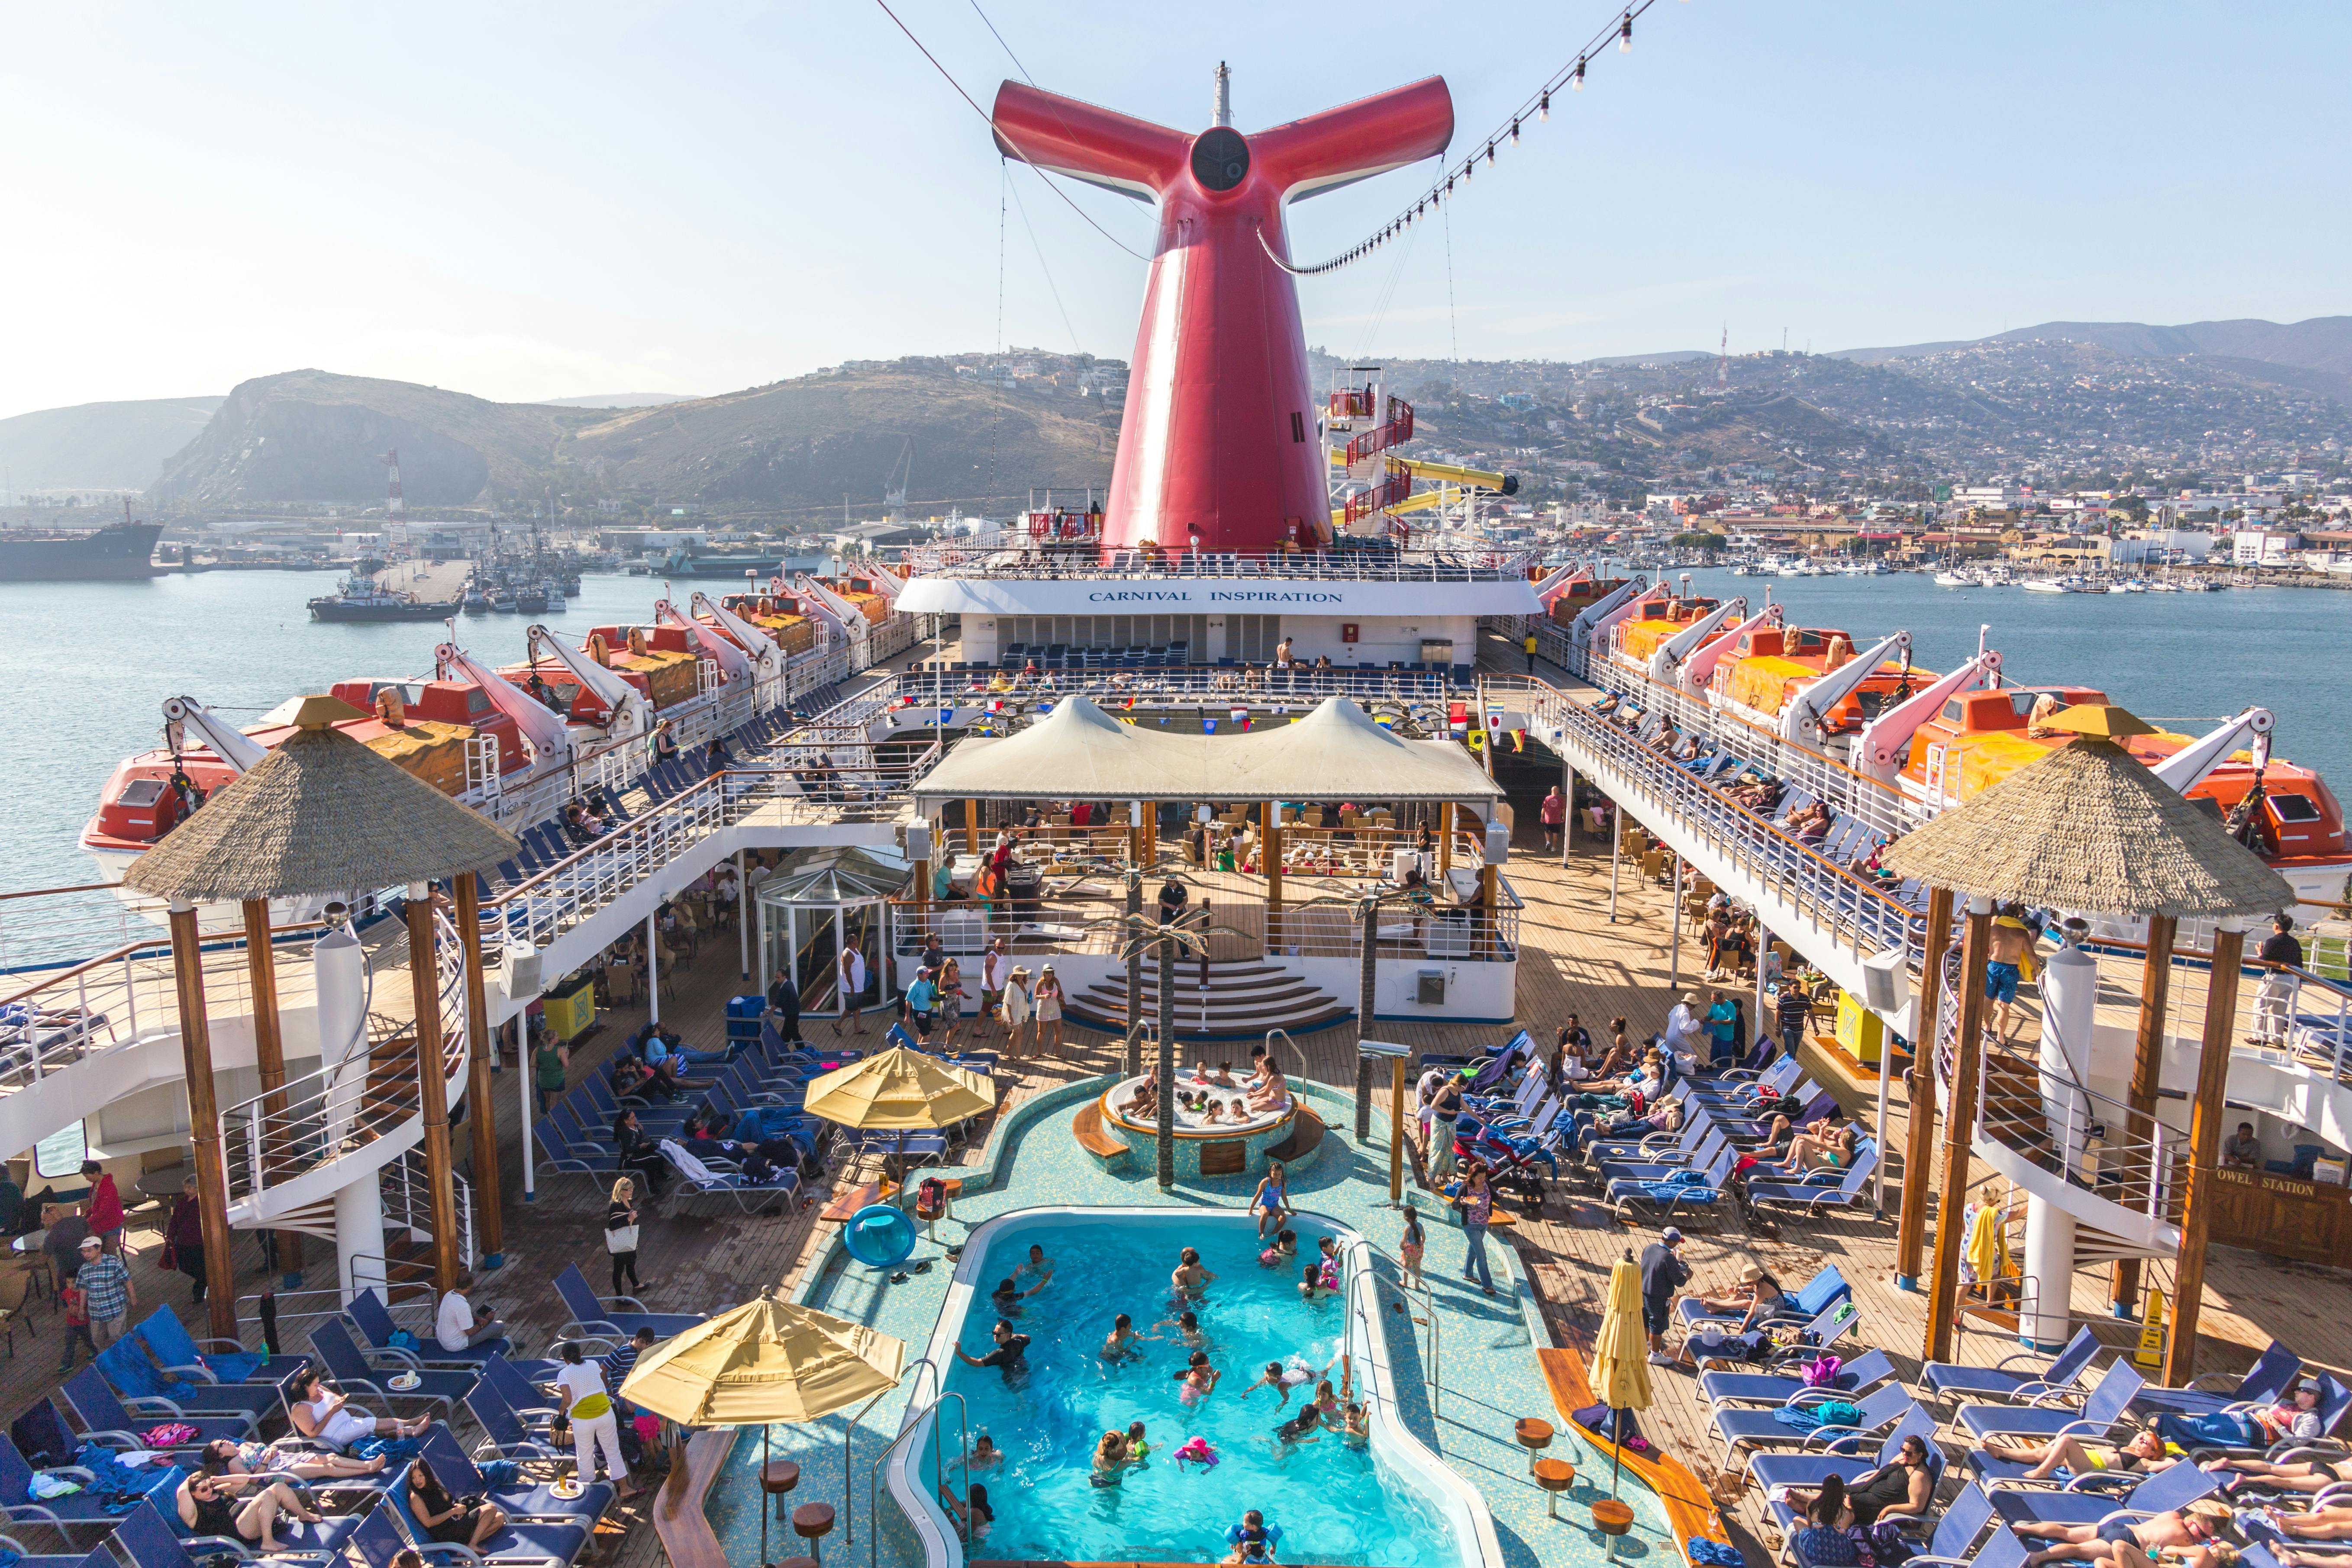 An inside view of a Carnival Cruise's upper deck, showing a pool, hot tub, and tons of other vacationers lounging in the area